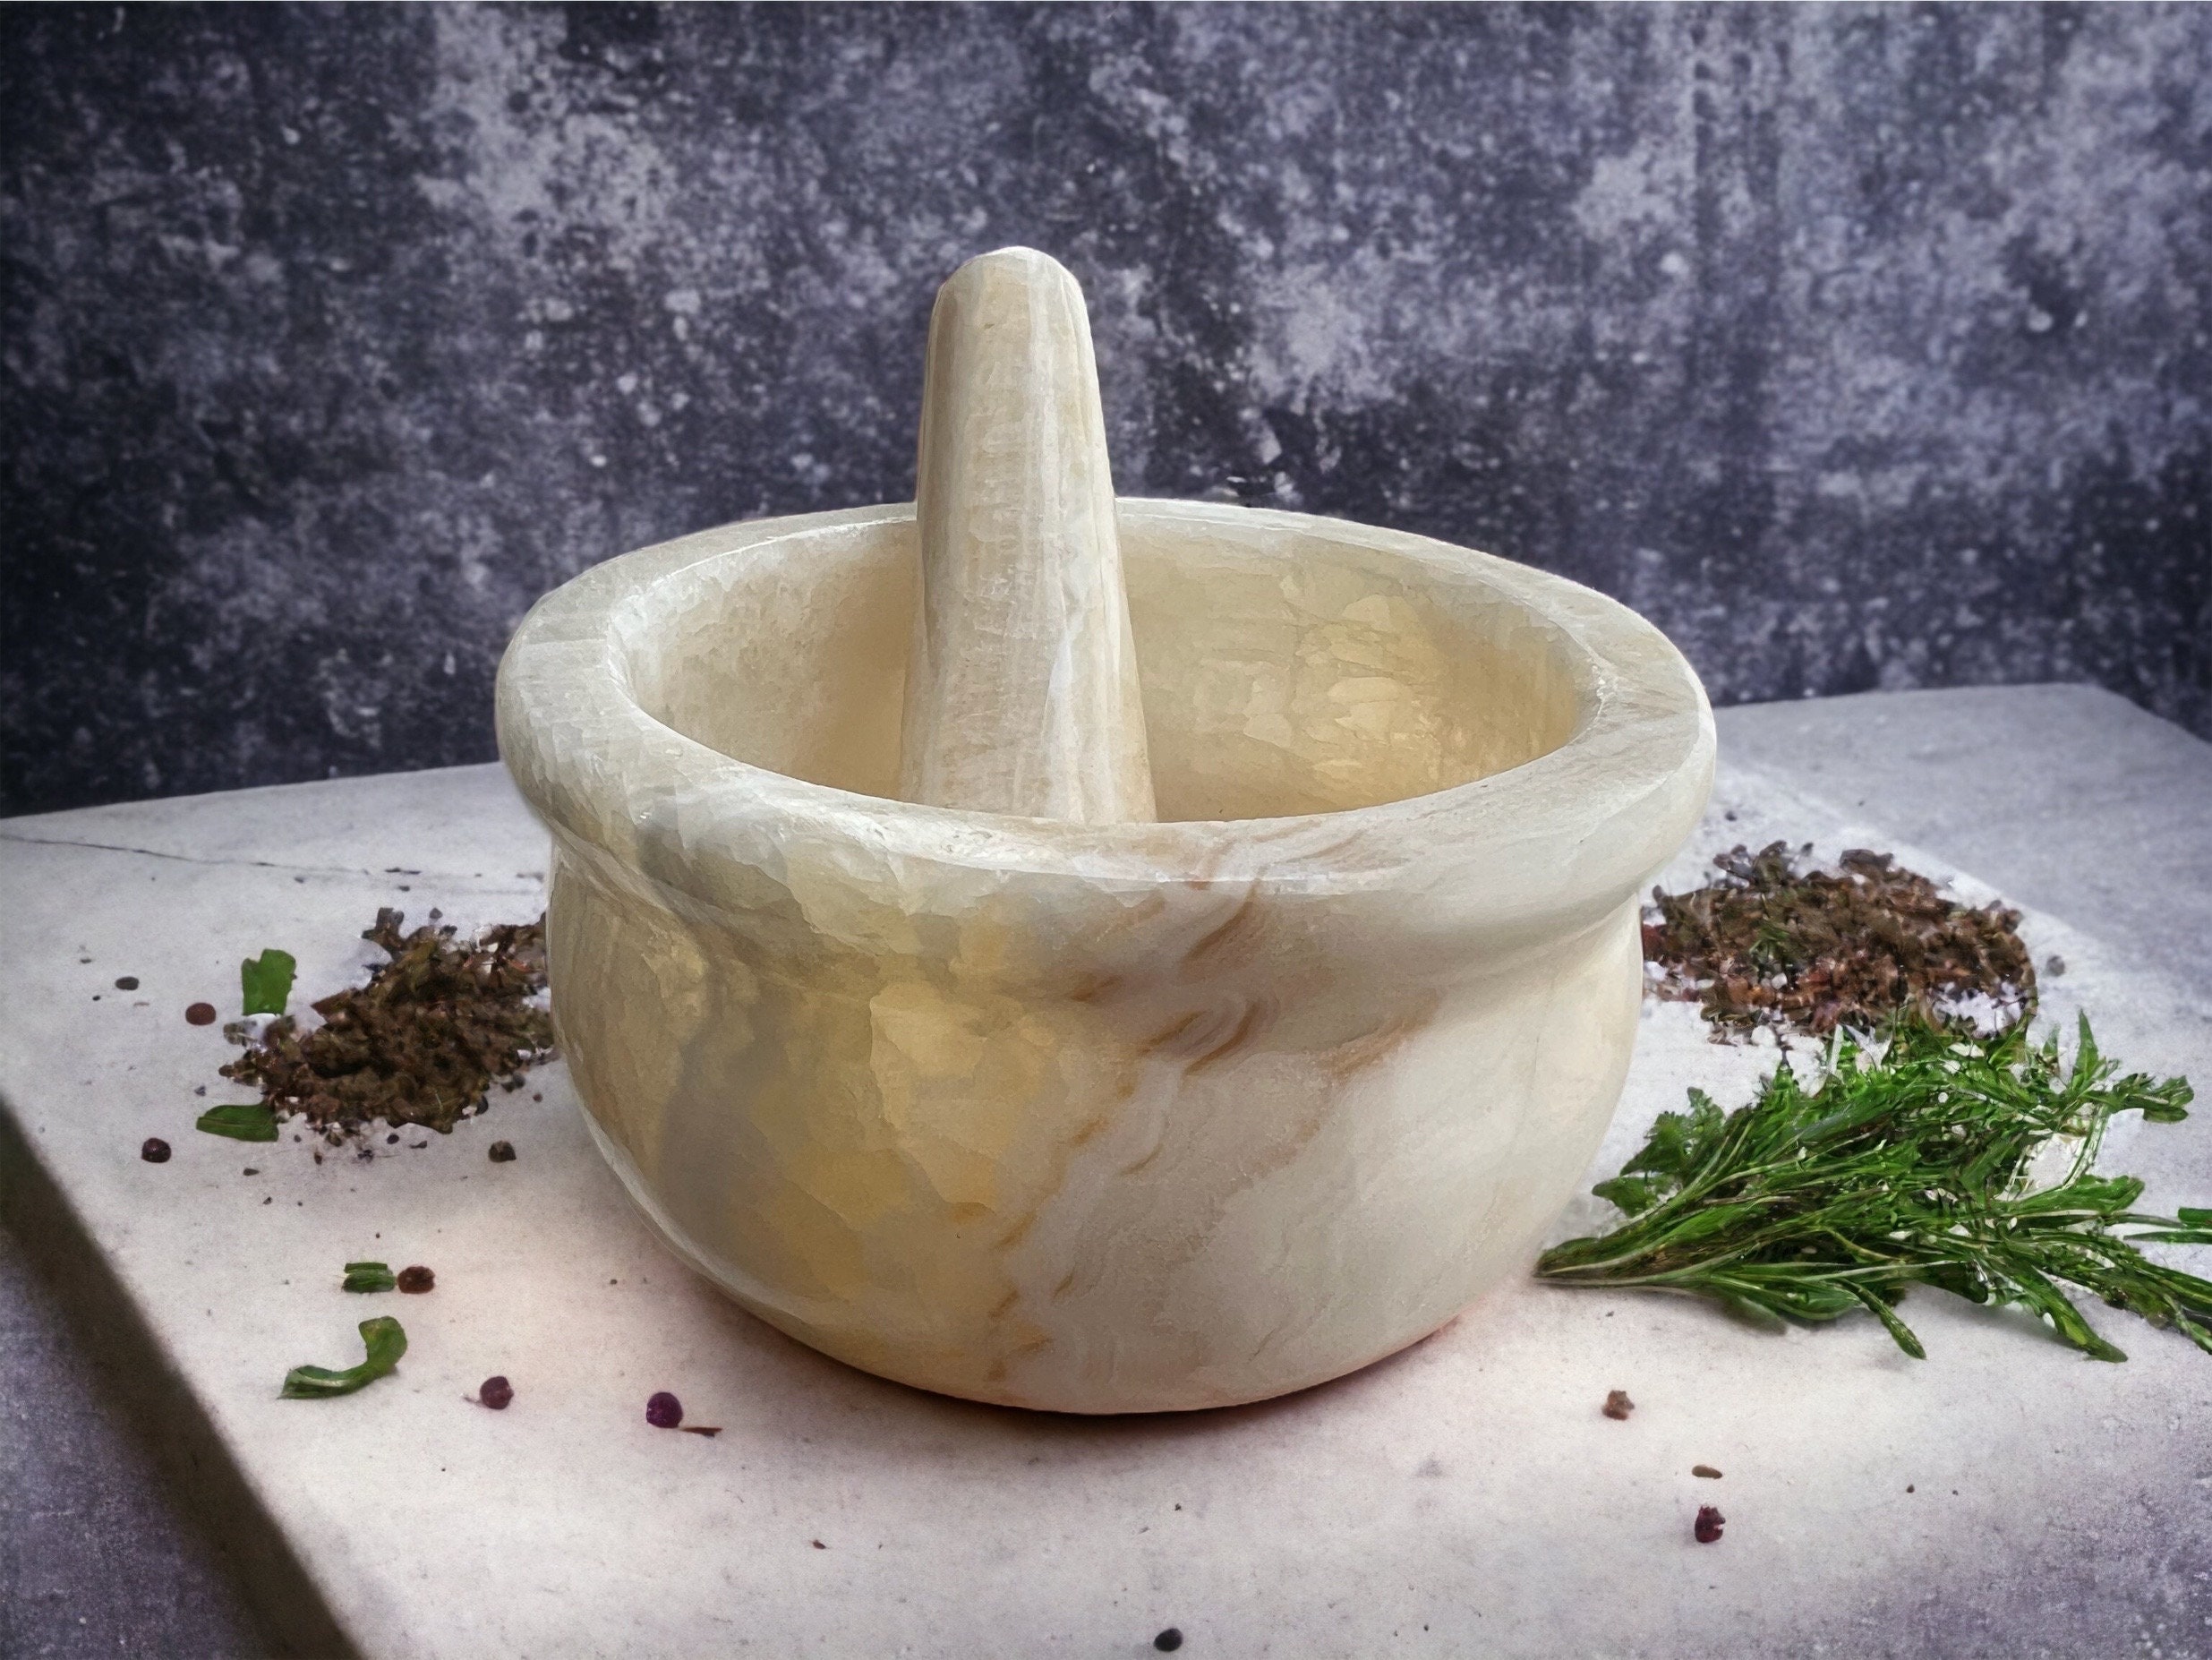 Large Pestle and Mortar Set Natural Spice & Herb Crusher Grinder Durable  Stone